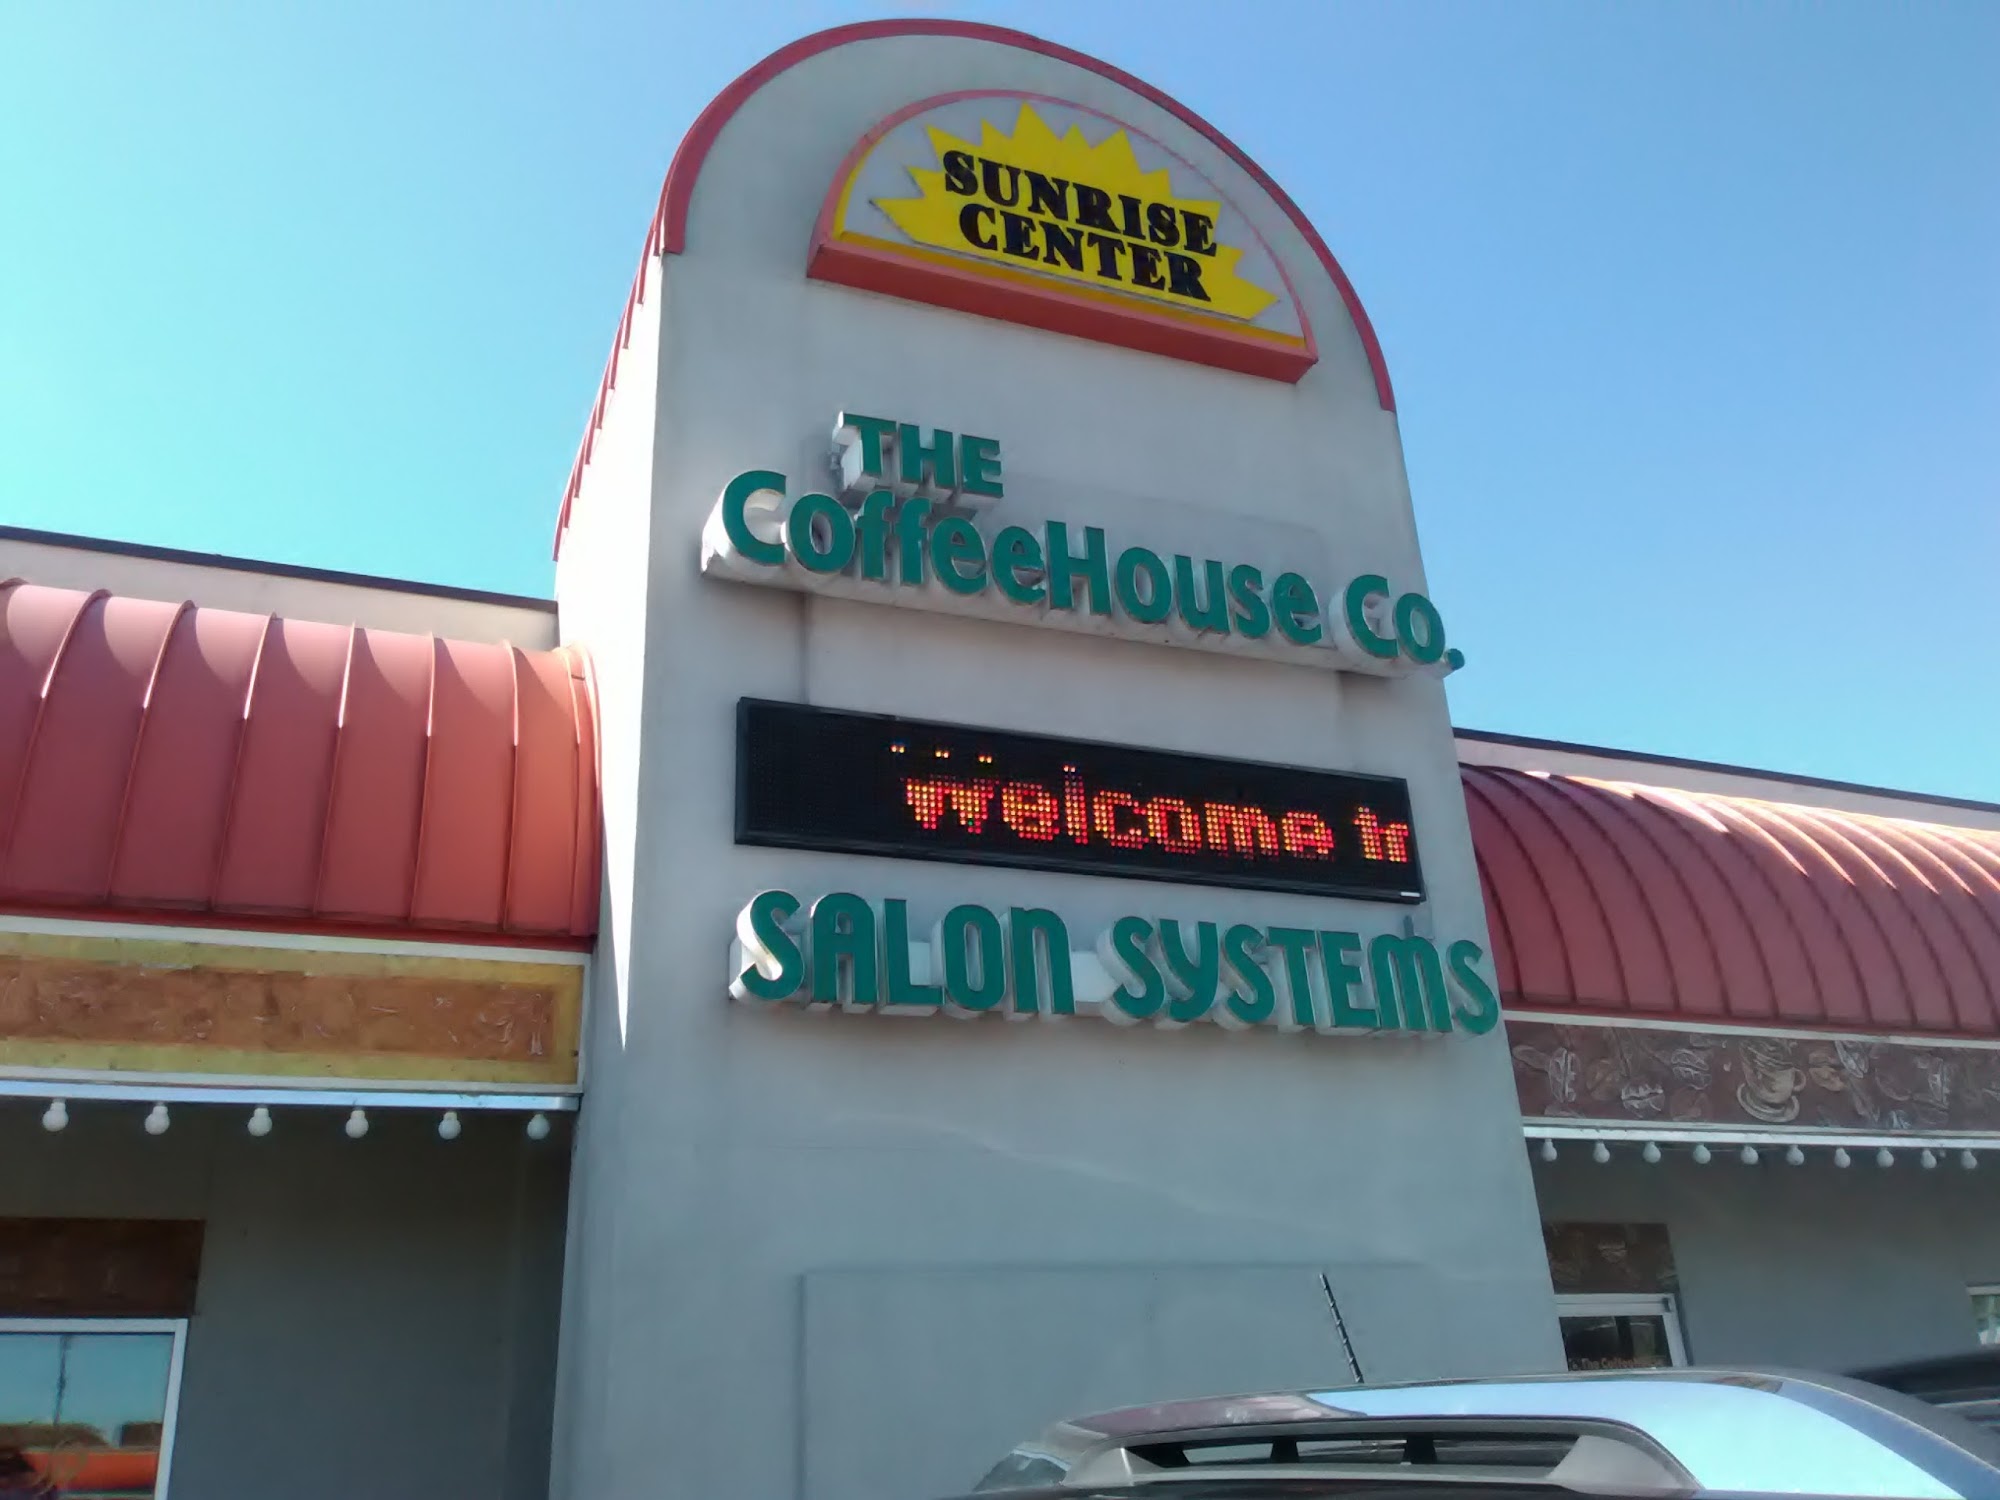 The CoffeeHouse and Salon Systems